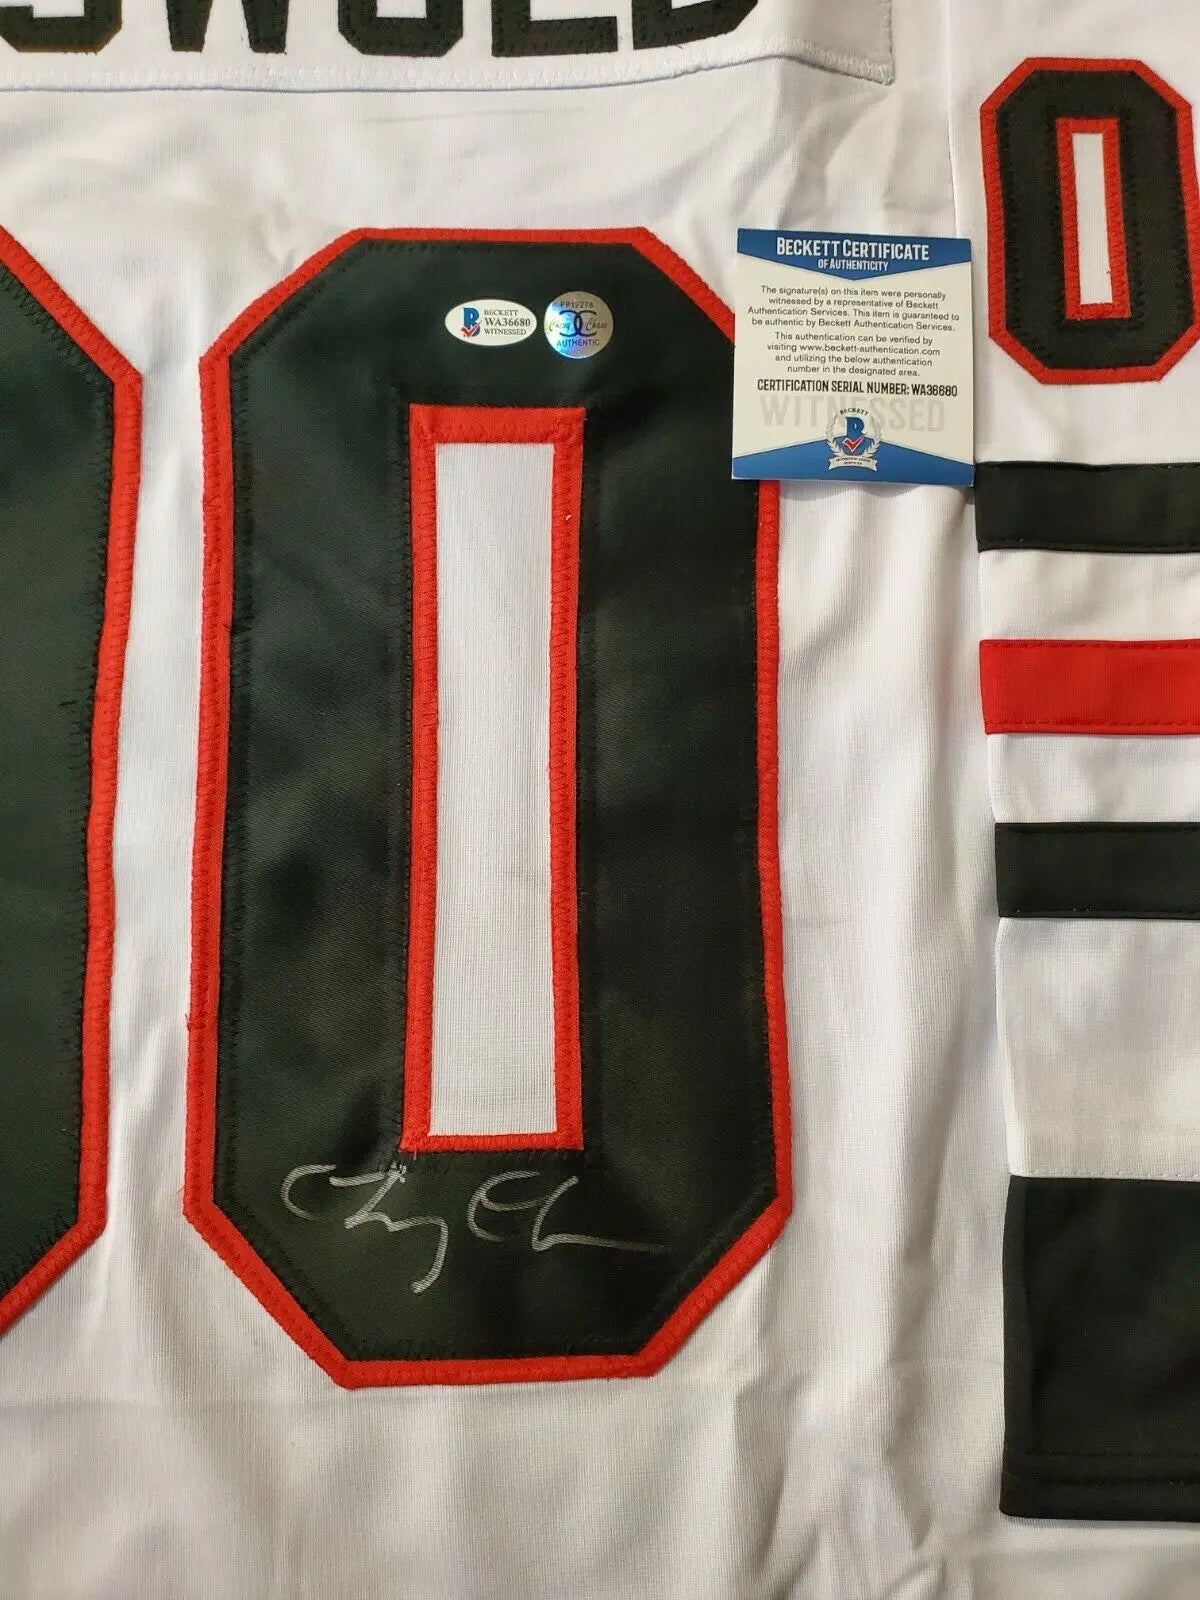 Chevy Chase Autographed National Lampoon's Christmas Vacation Clark  Griswold Hockey Jersey - Dynasty Sports & Framing